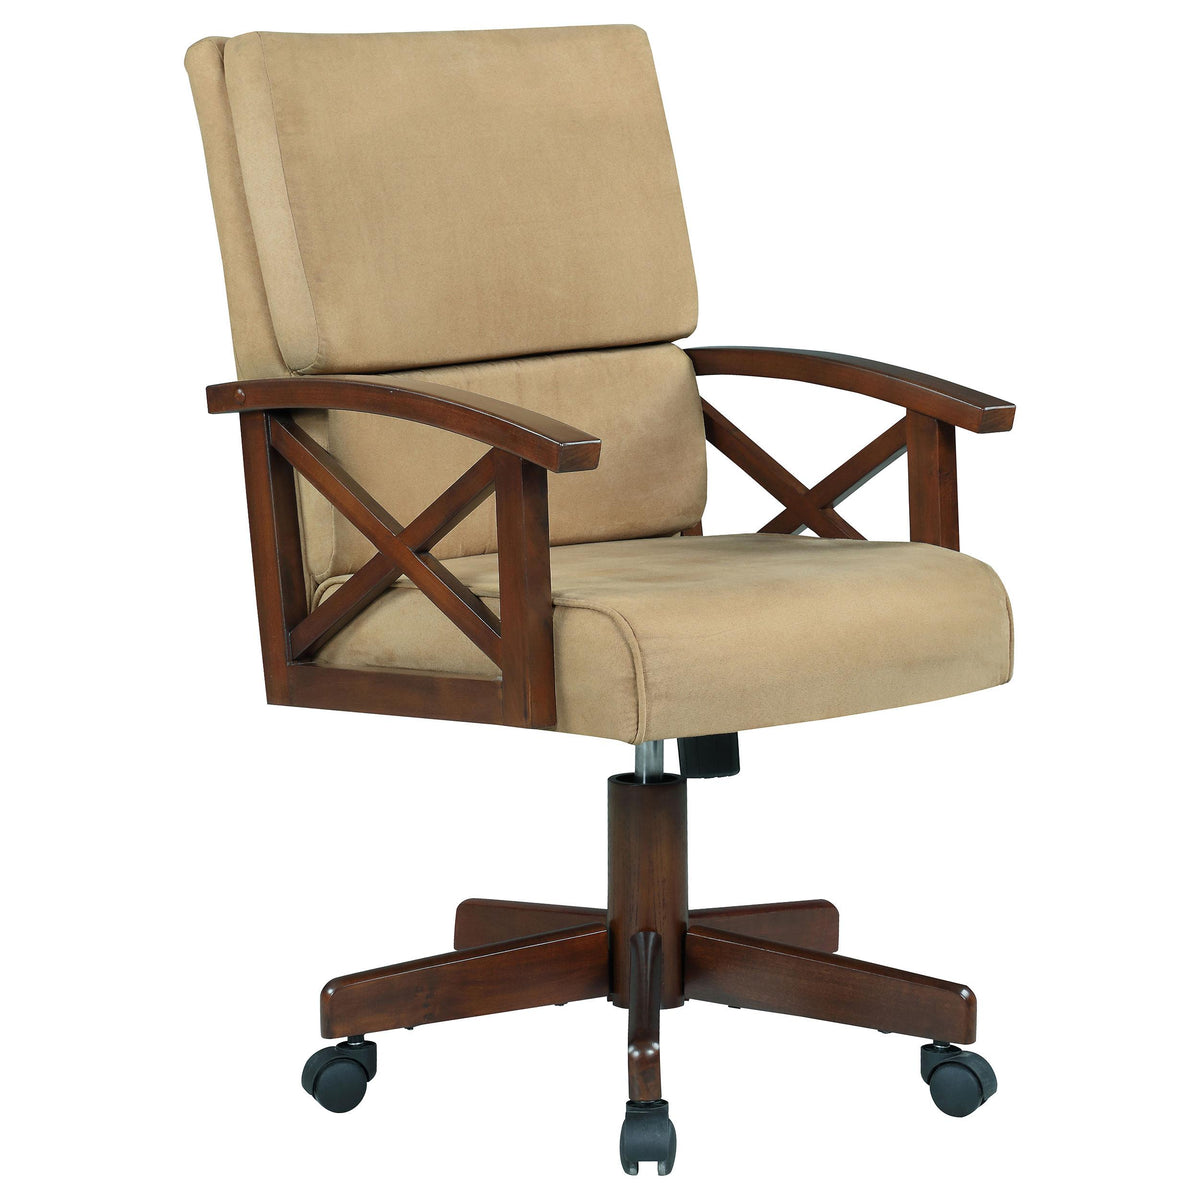 Marietta Upholstered Game Chair Tobacco and Tan Marietta Upholstered Game Chair Tobacco and Tan Half Price Furniture